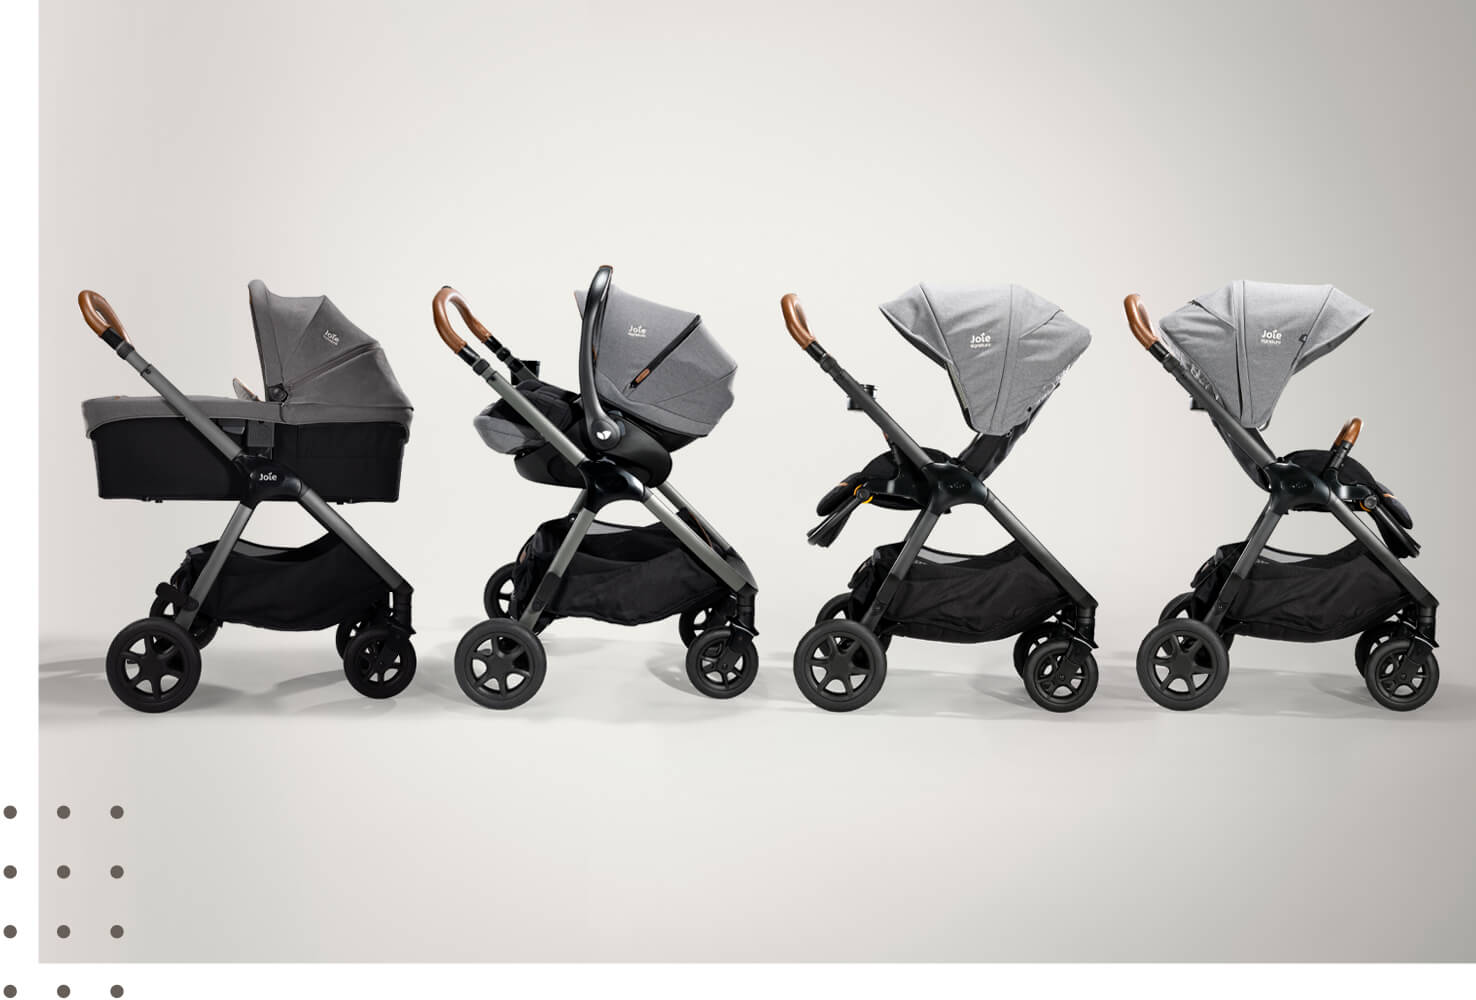 Joie finiti pram in light gray in its four modes; carry cot, infant carrier, parent facing and forward-facing seat.